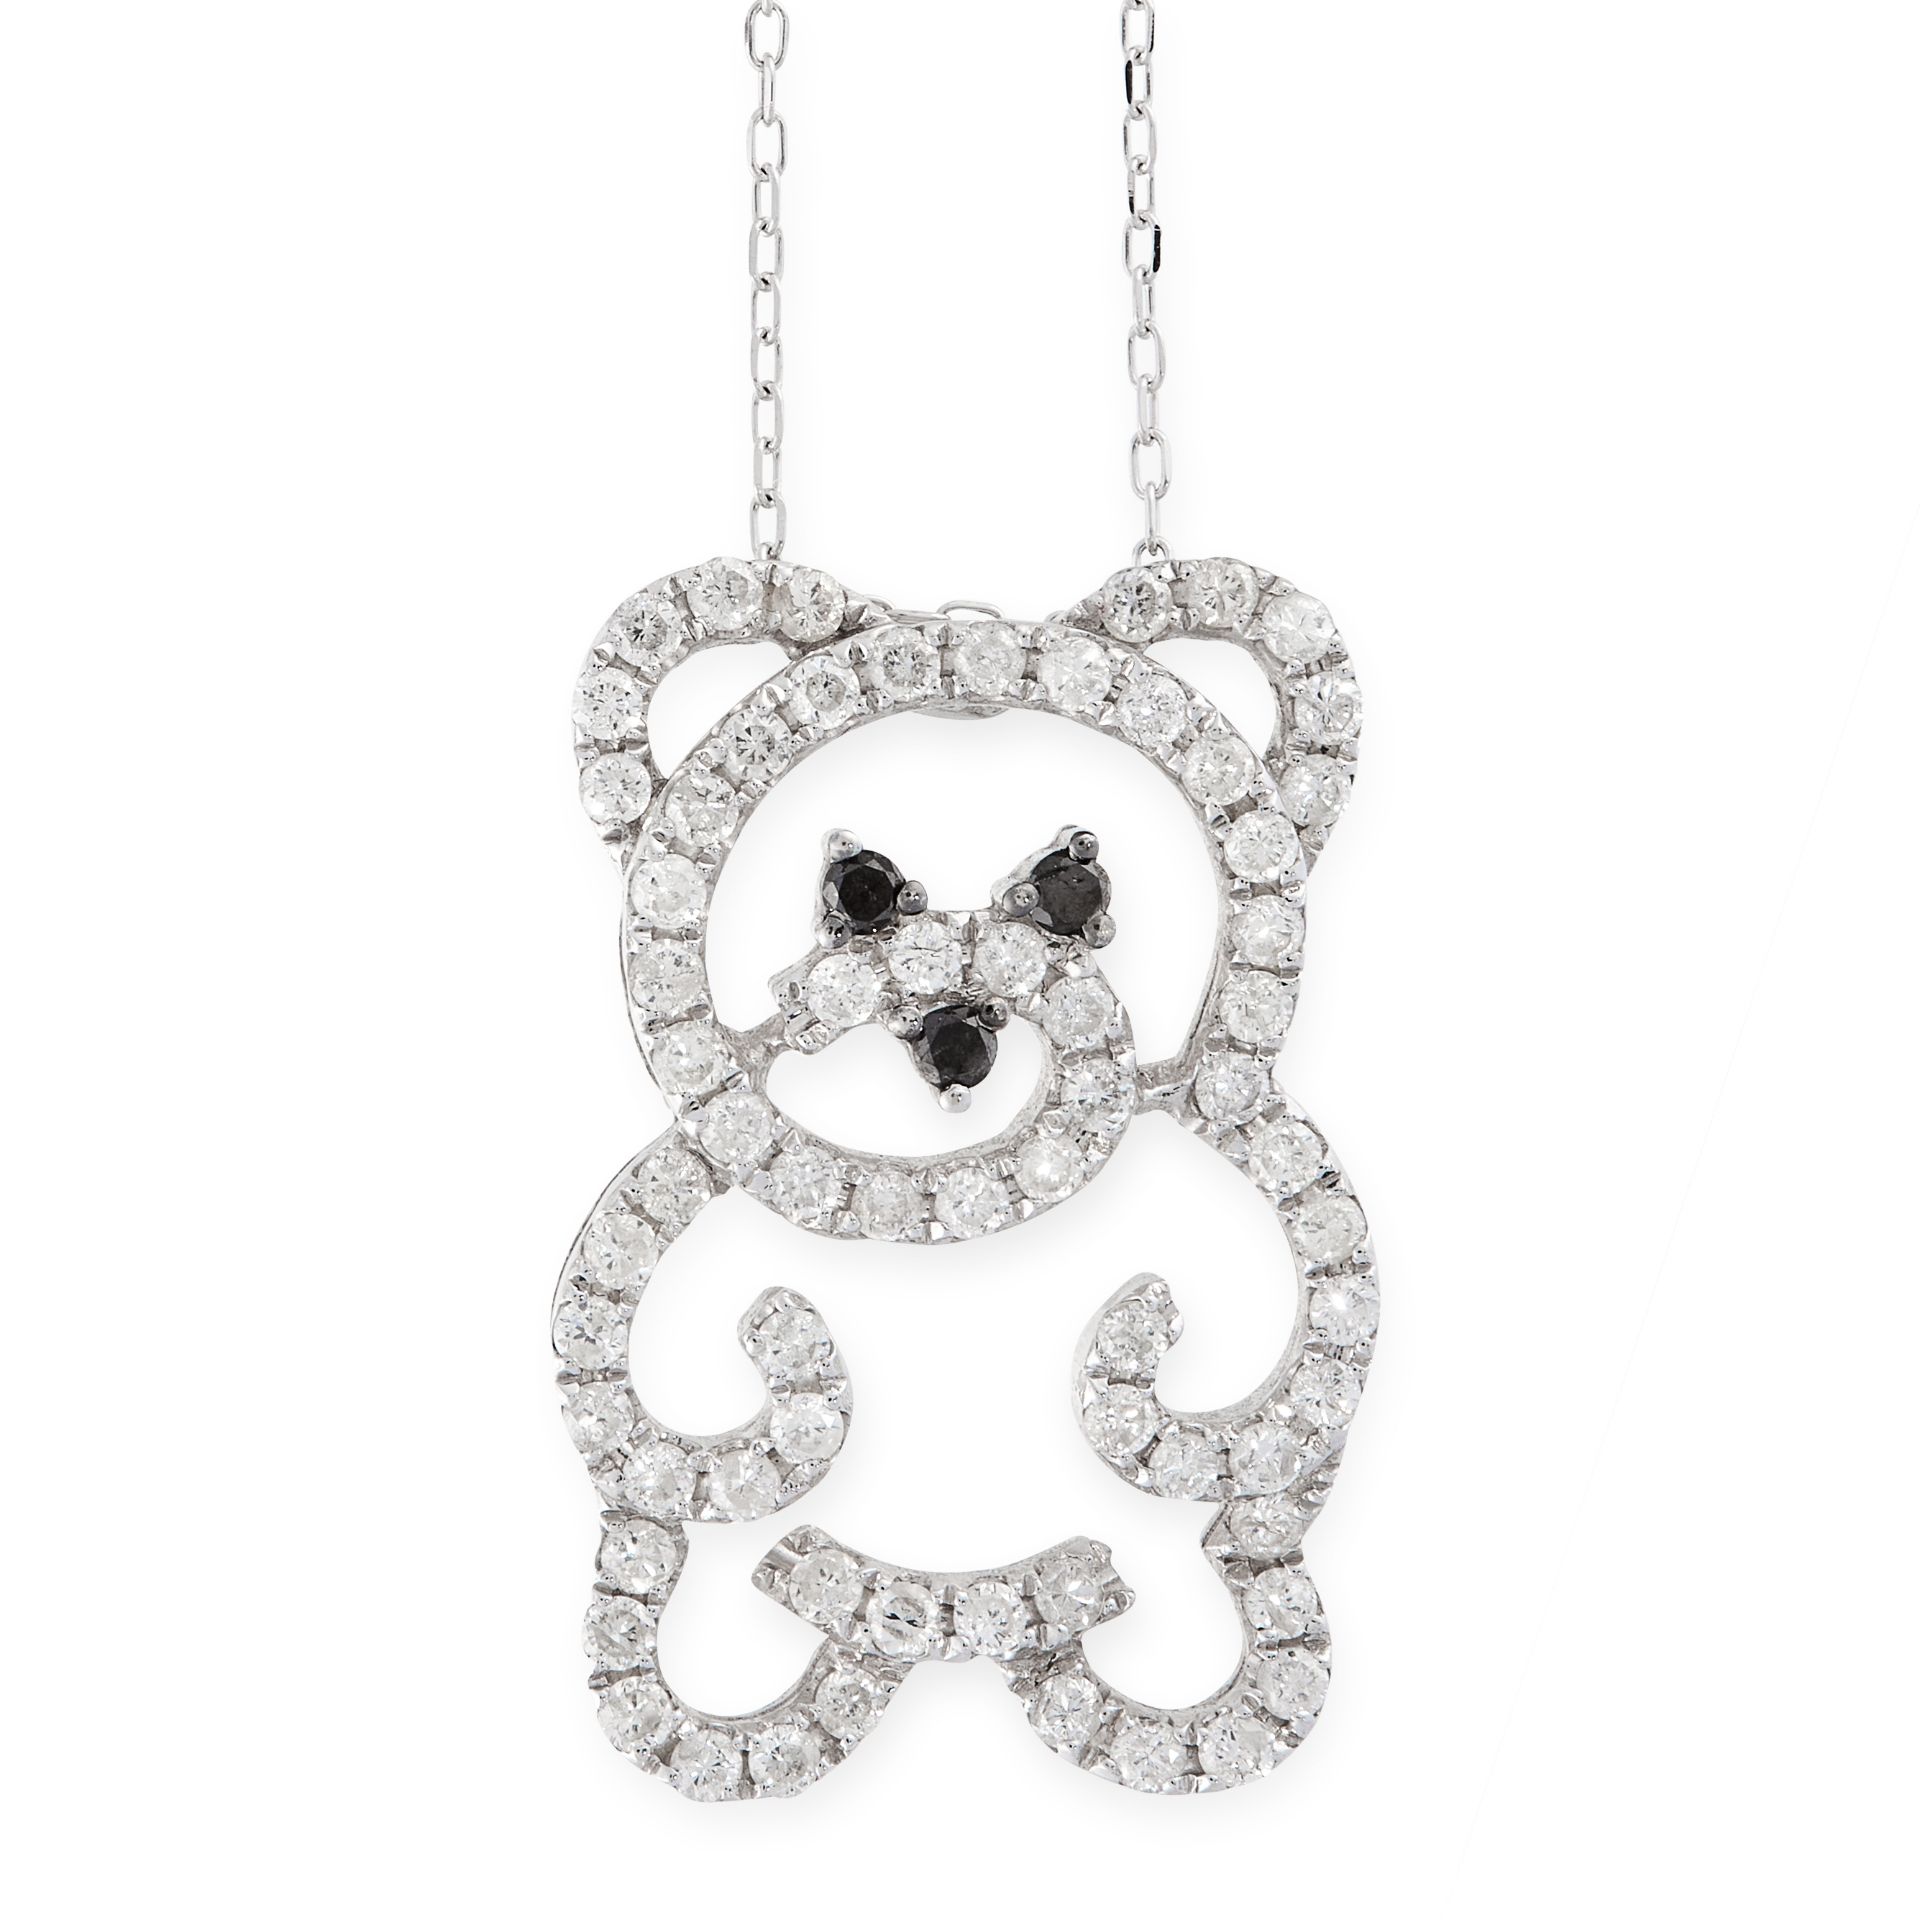 A DIAMOND AND SAPPHIRE TEDDY BEAR PENDANT AND CHAIN in 18ct white gold, designed as the outline of a